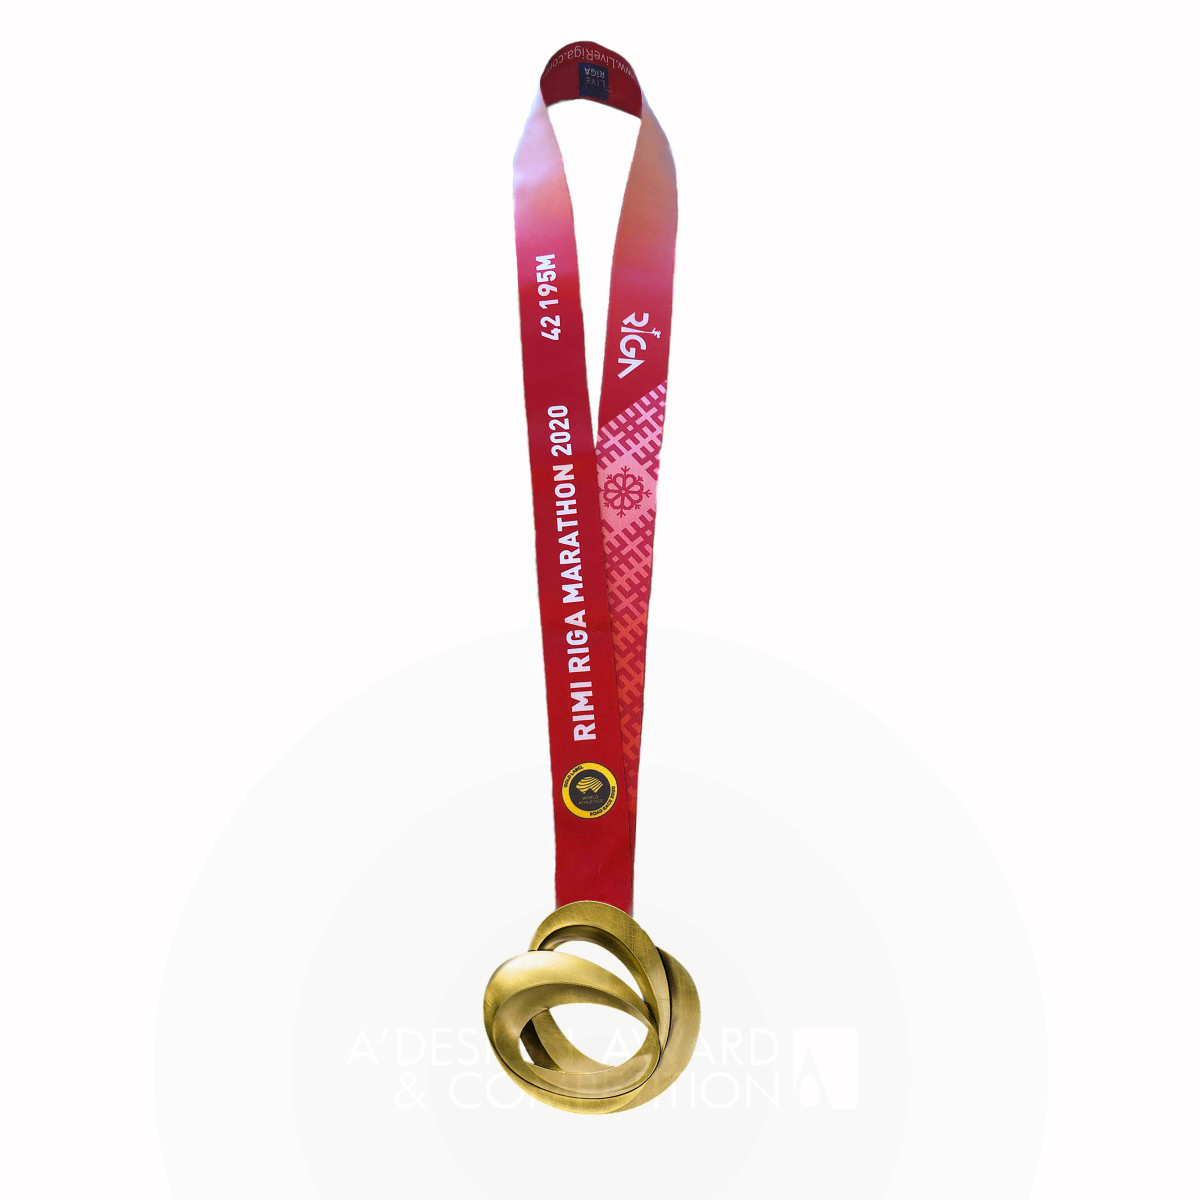 Junichi Kawanishi wins Bronze at the prestigious A' Award, Trophy, Prize and Competition Design Award with Rimi Riga Marathon 2020 Runner&#039;s Medals.